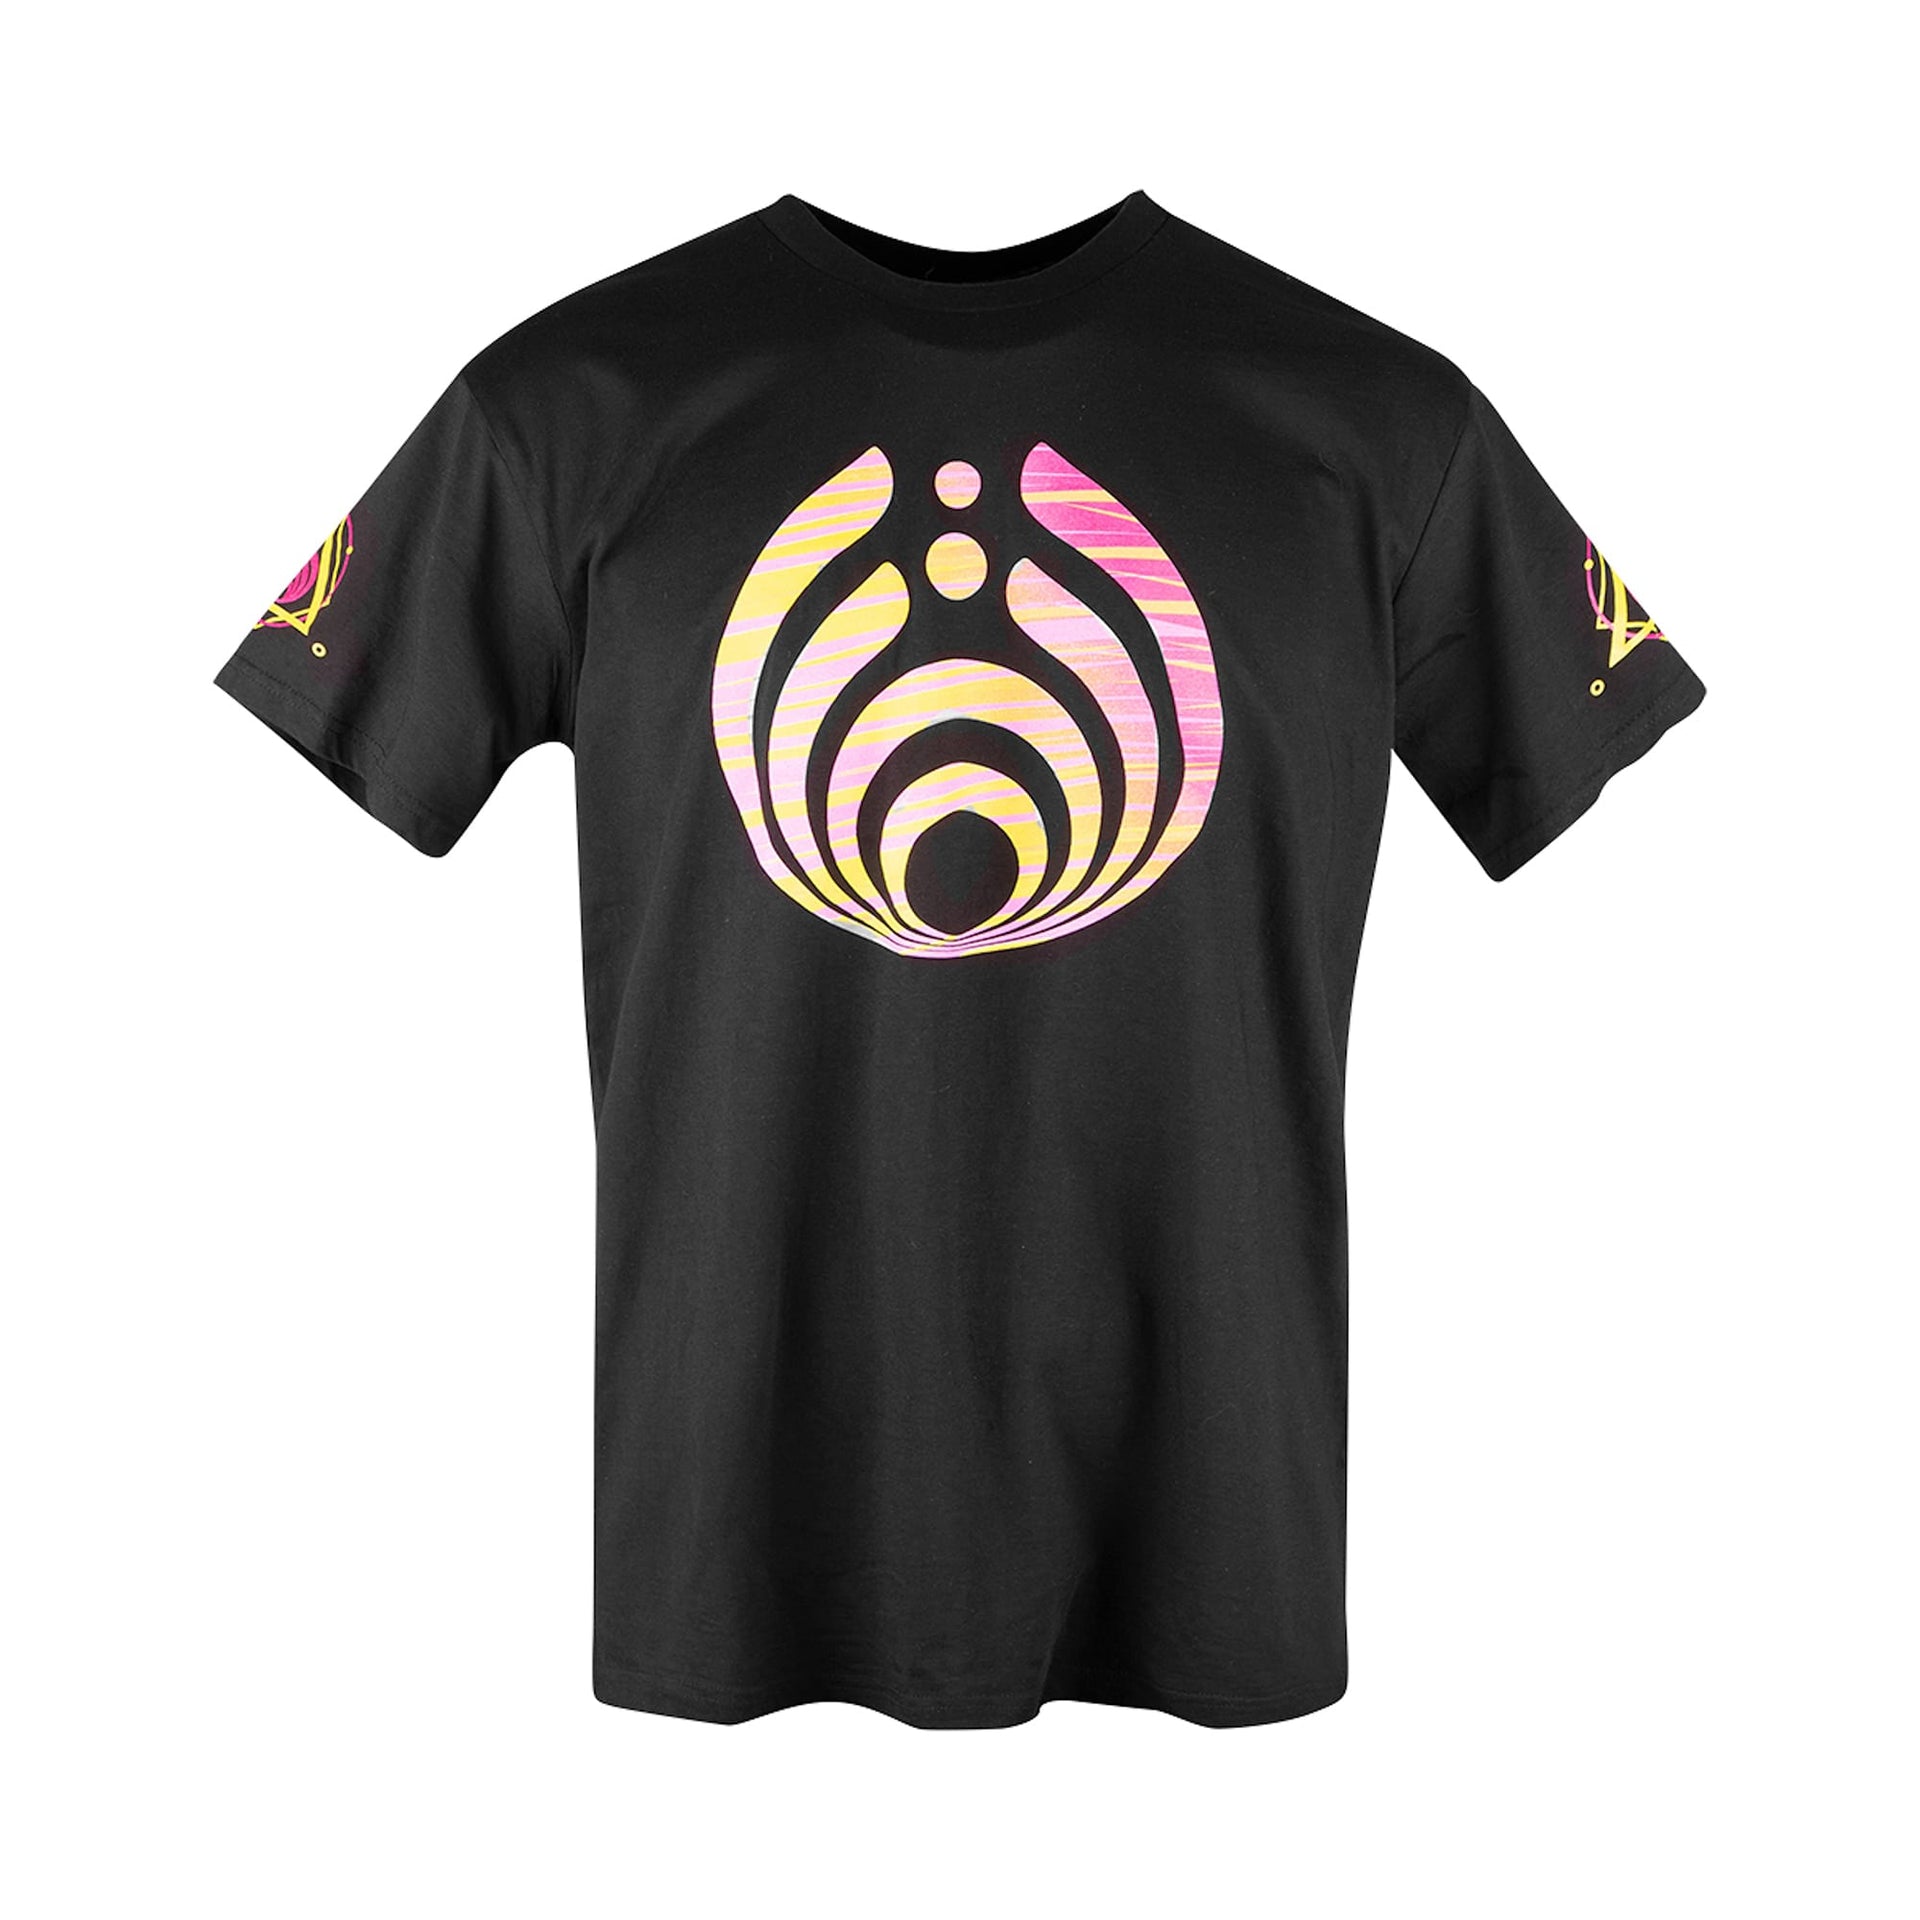 Freestyle 2019 Event T-Shirt